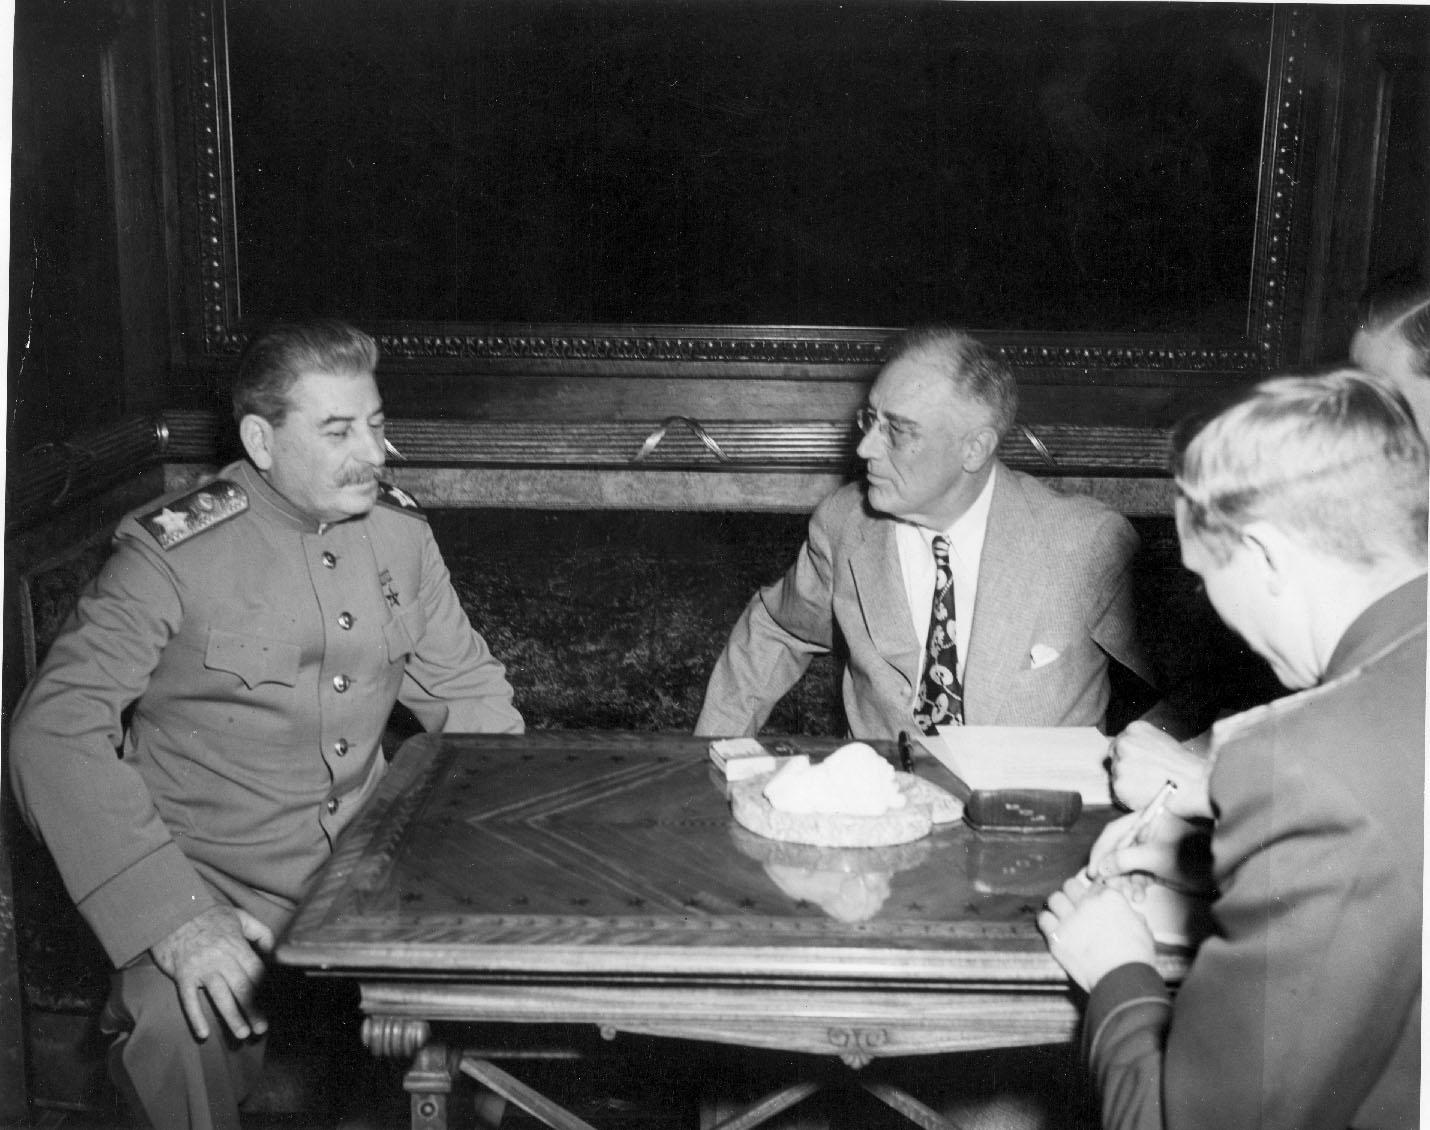 Franklin D. Roosevelt and Joseph Stalin at Livadia Palace during the